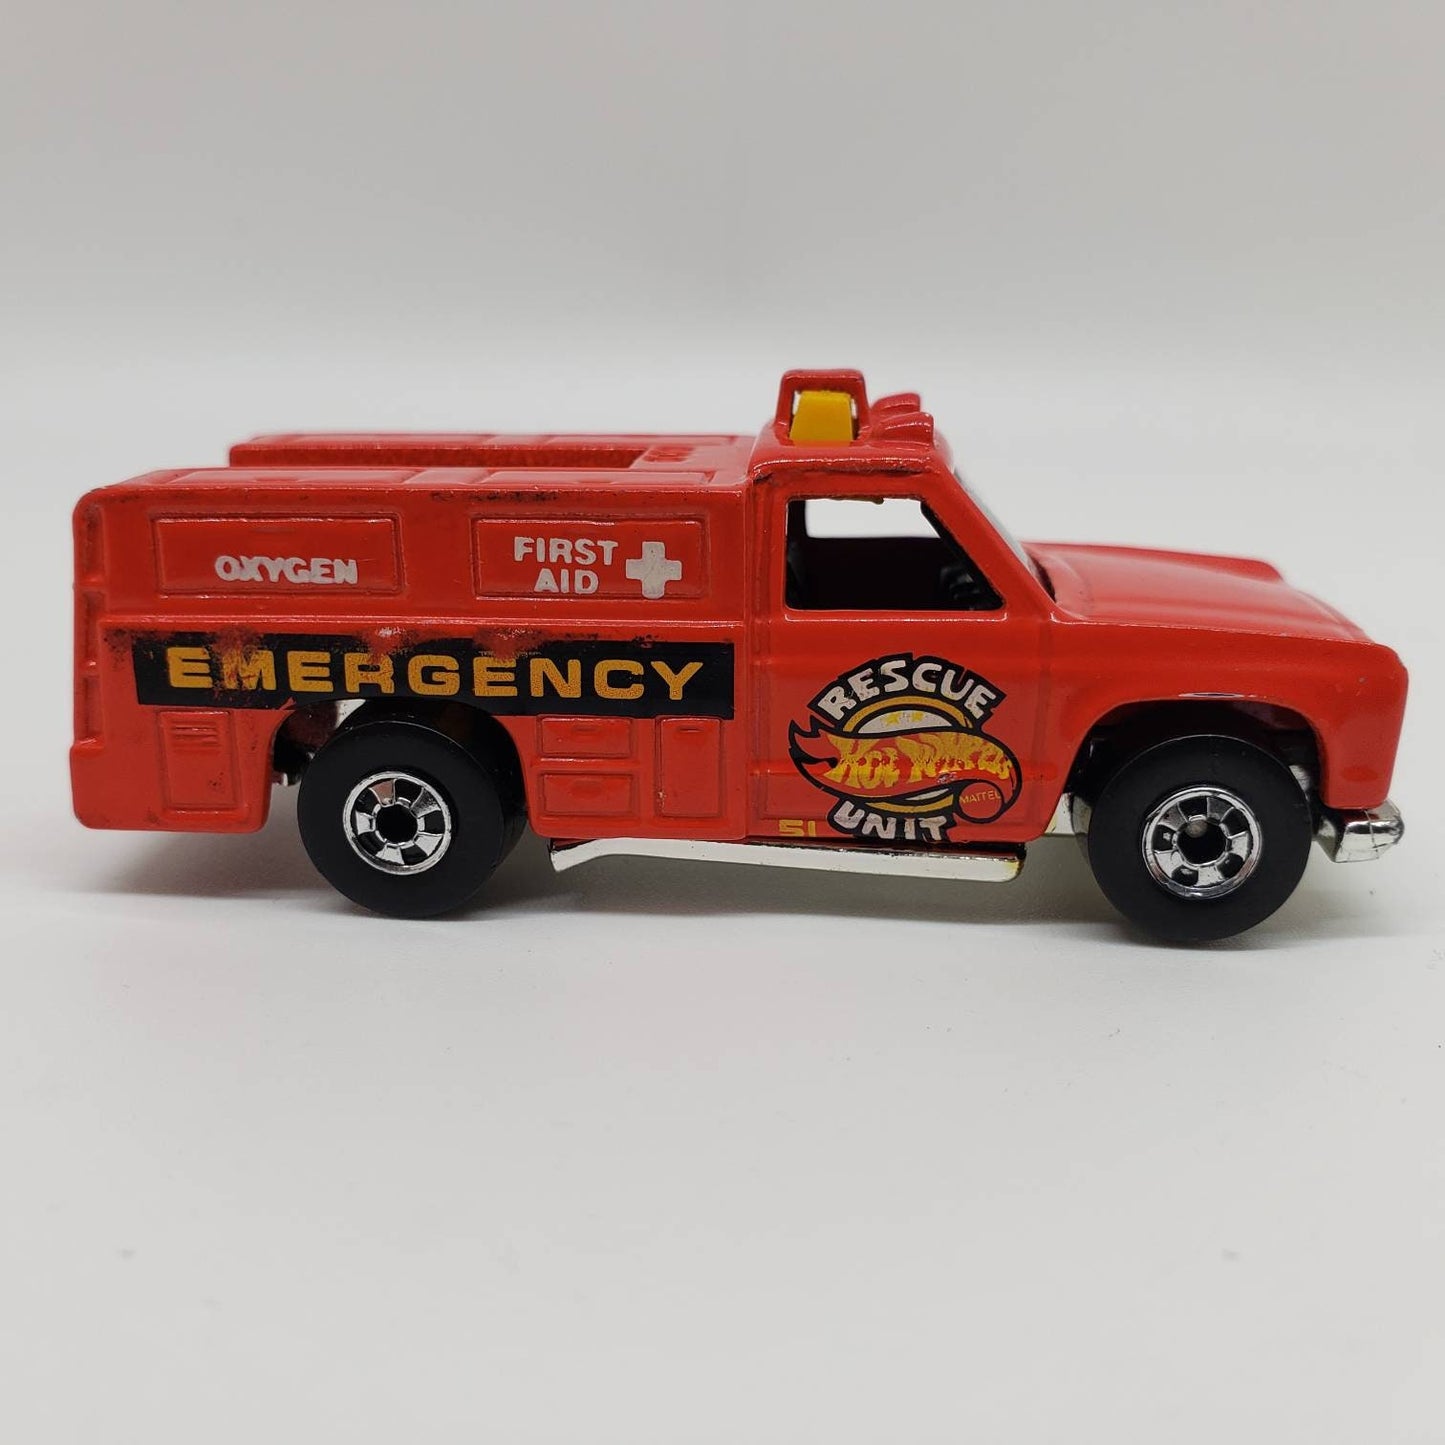 1988 Hot Wheels Rescue Ranger Red Workhorses Perfect Birthday Gift Miniature Collectable Scale Model Toy Car